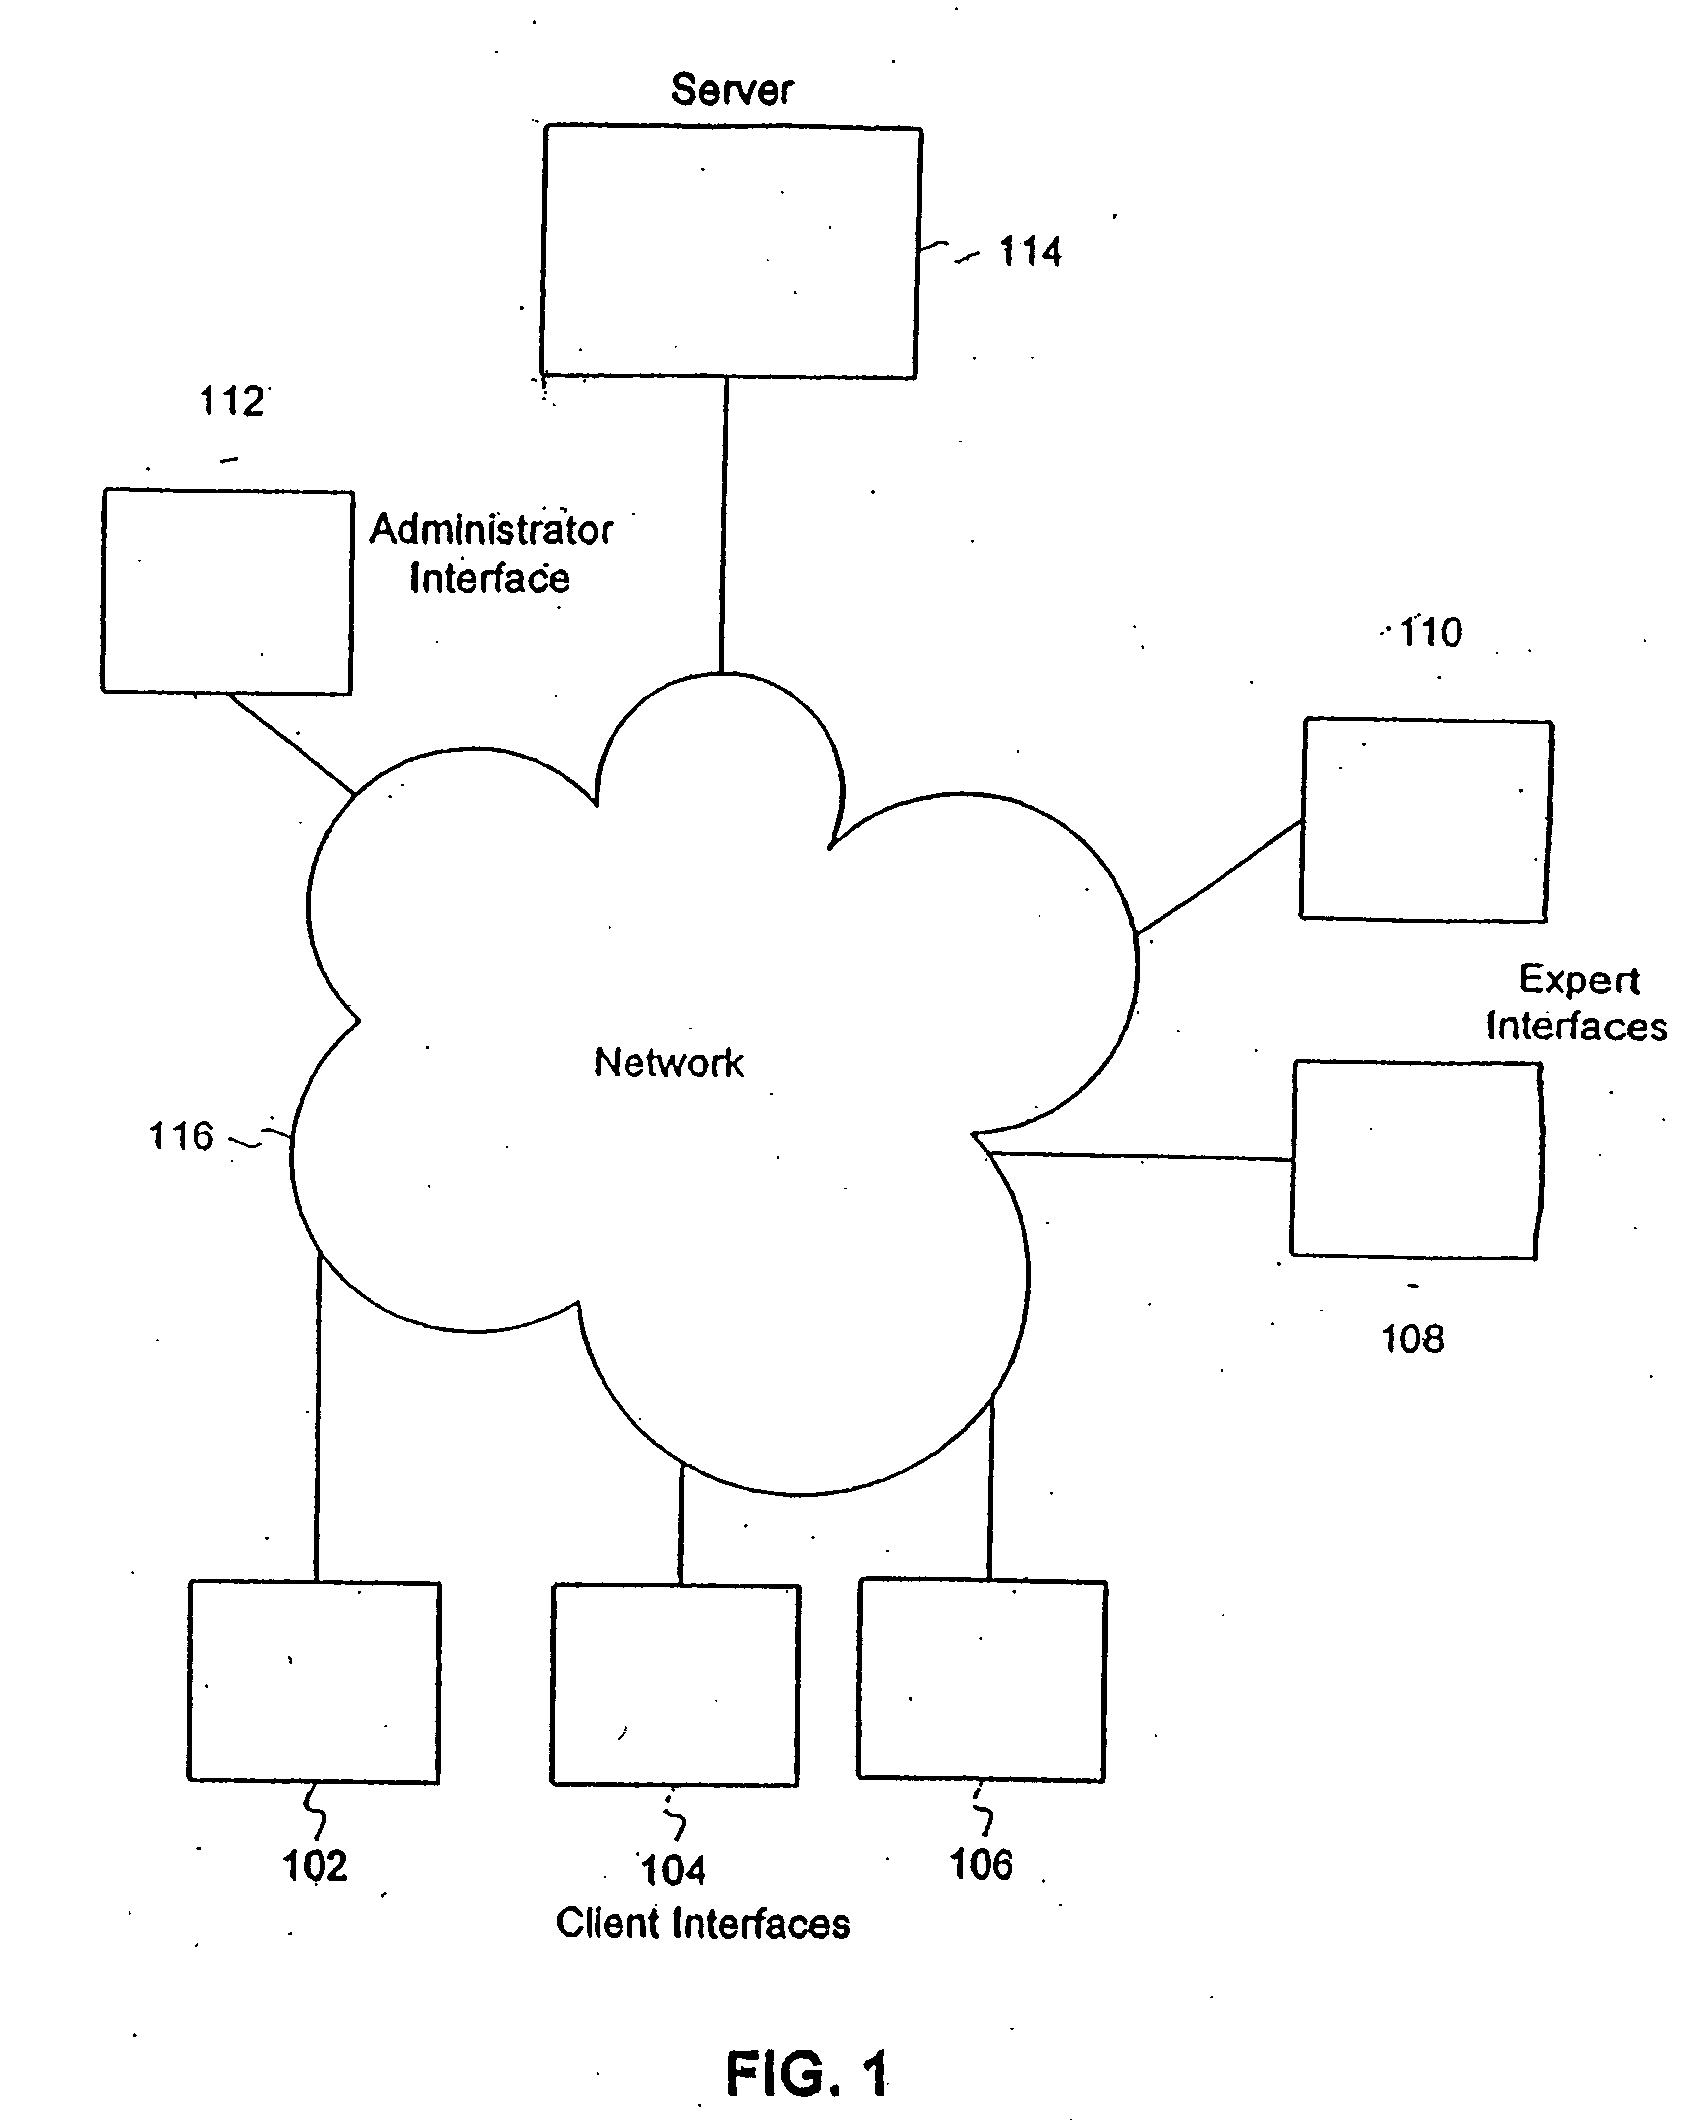 System and method for supporting multiple question and answer fora in different web sites